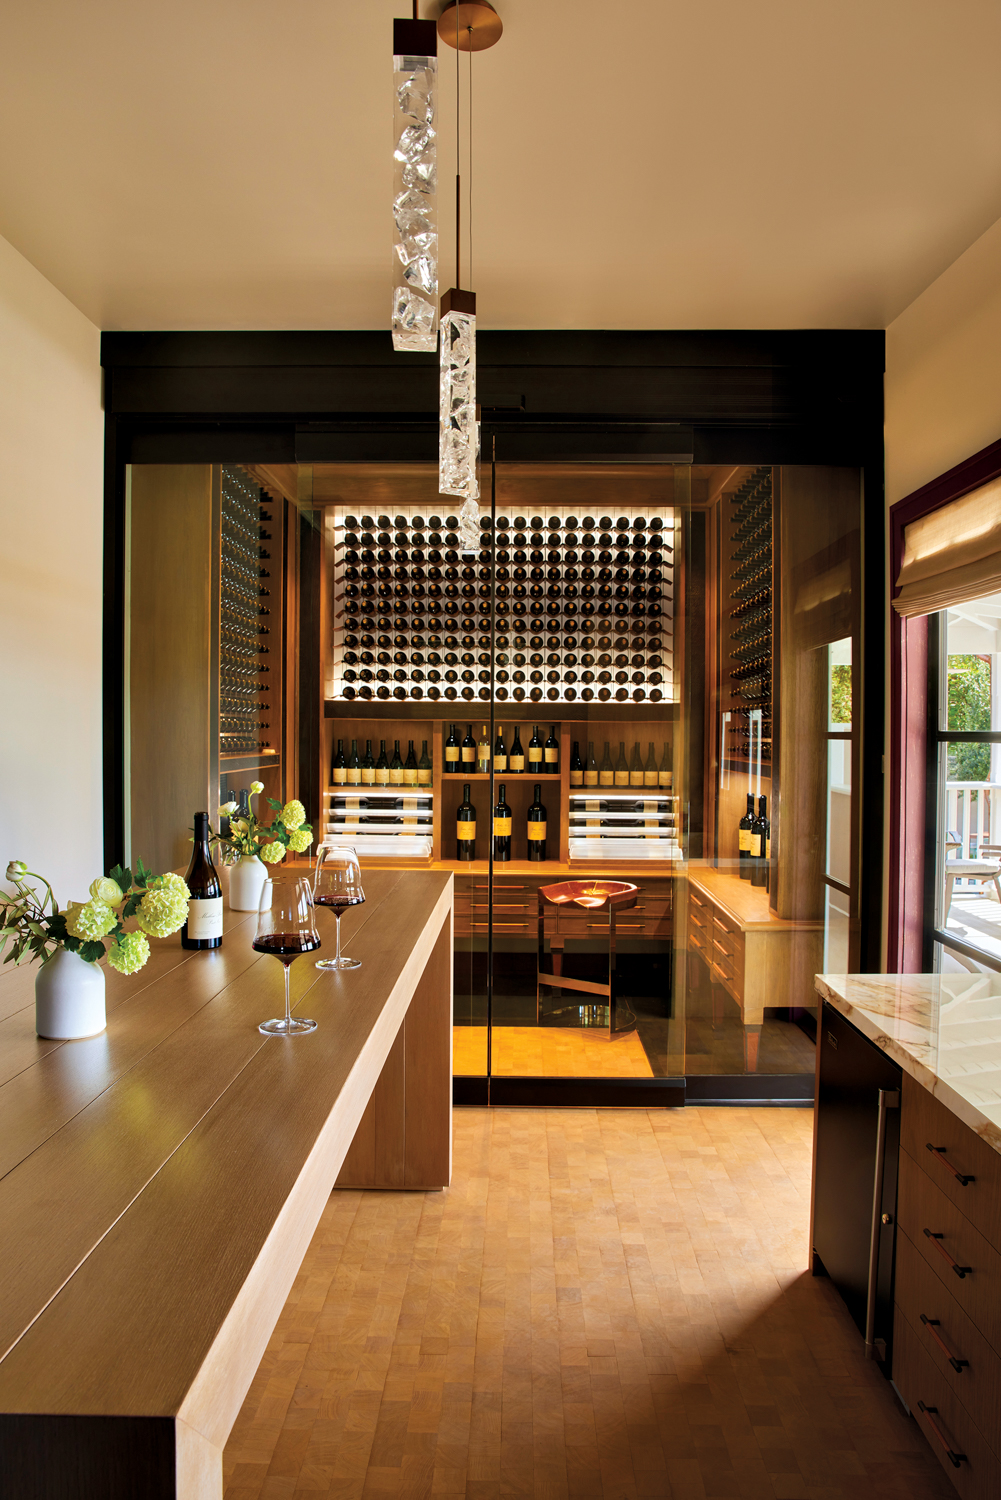 A glass-enclosed wine storage room behind a long wood table.